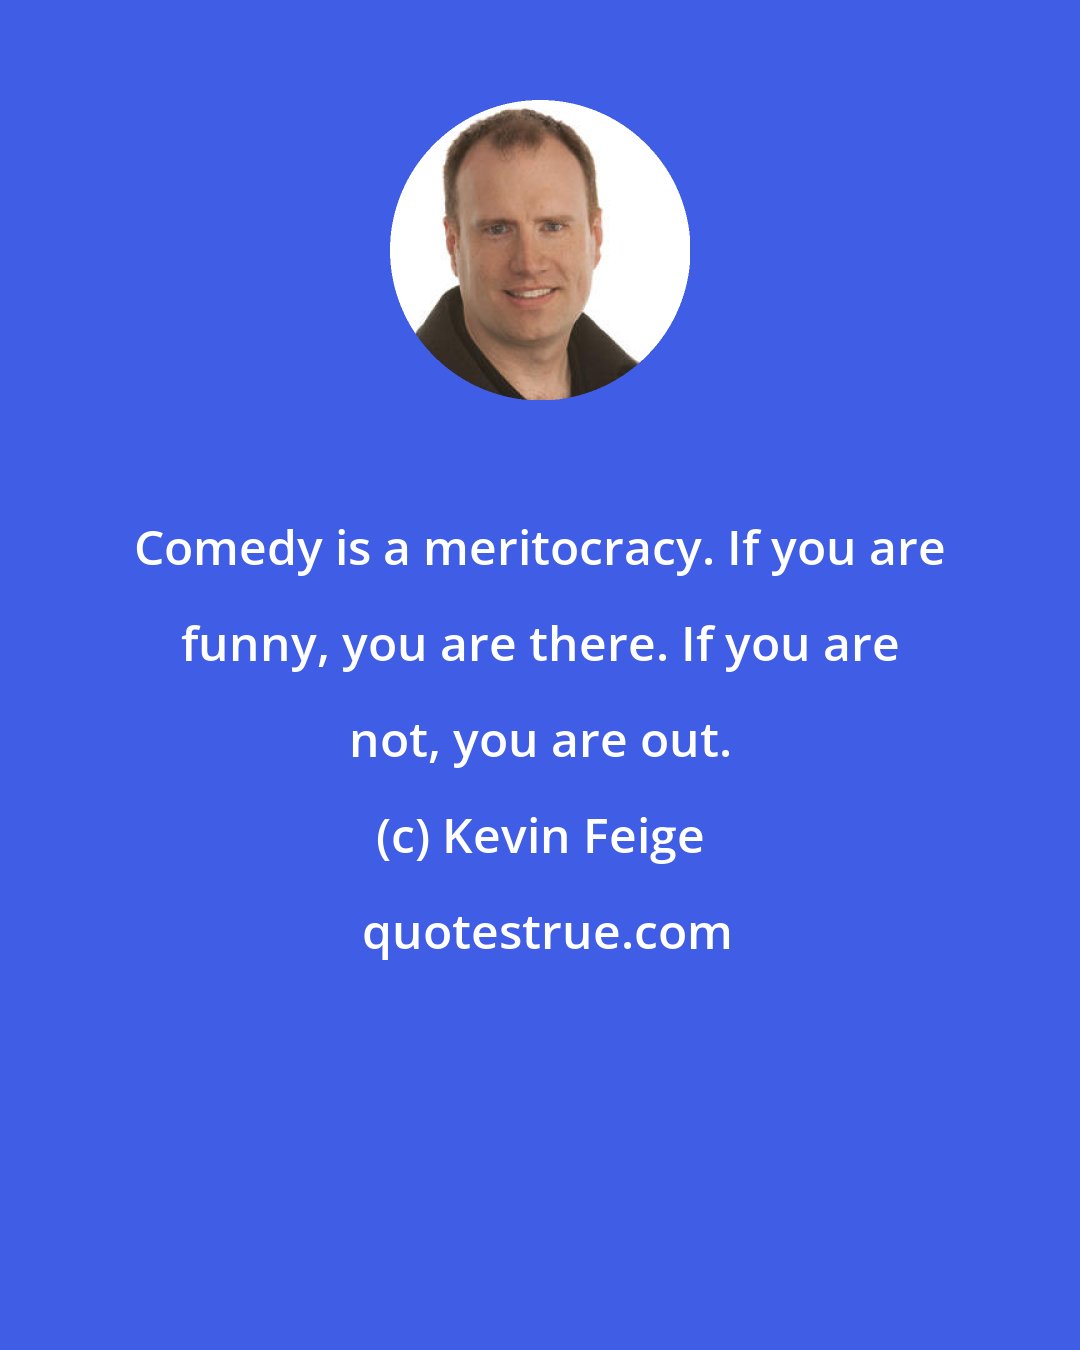 Kevin Feige: Comedy is a meritocracy. If you are funny, you are there. If you are not, you are out.